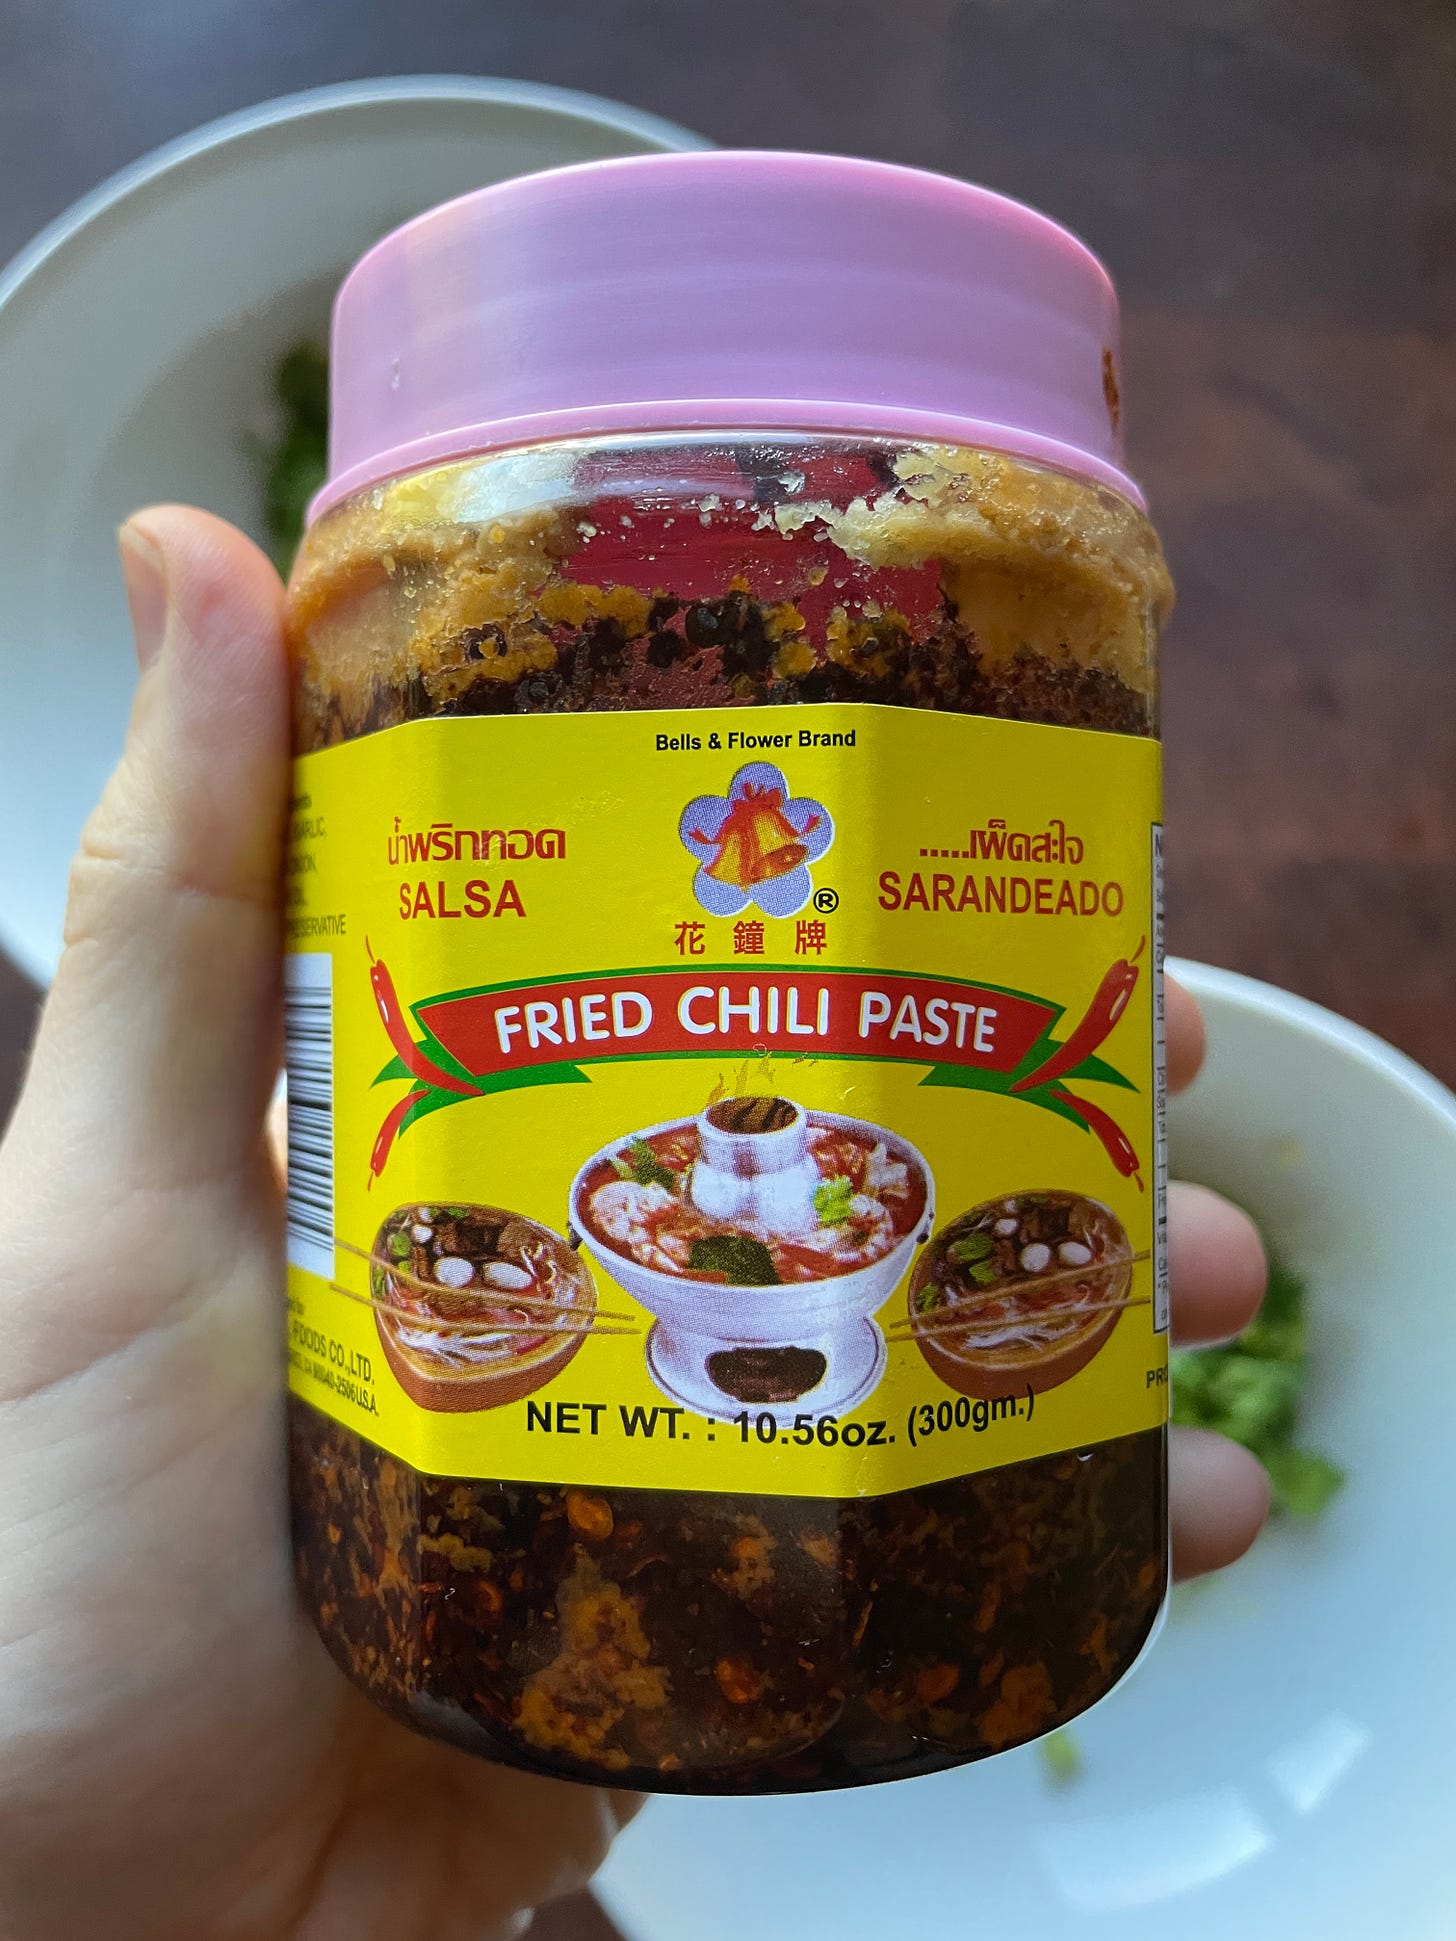 A hand holding a container of fried chili paste that has a yellow label and a pink lid